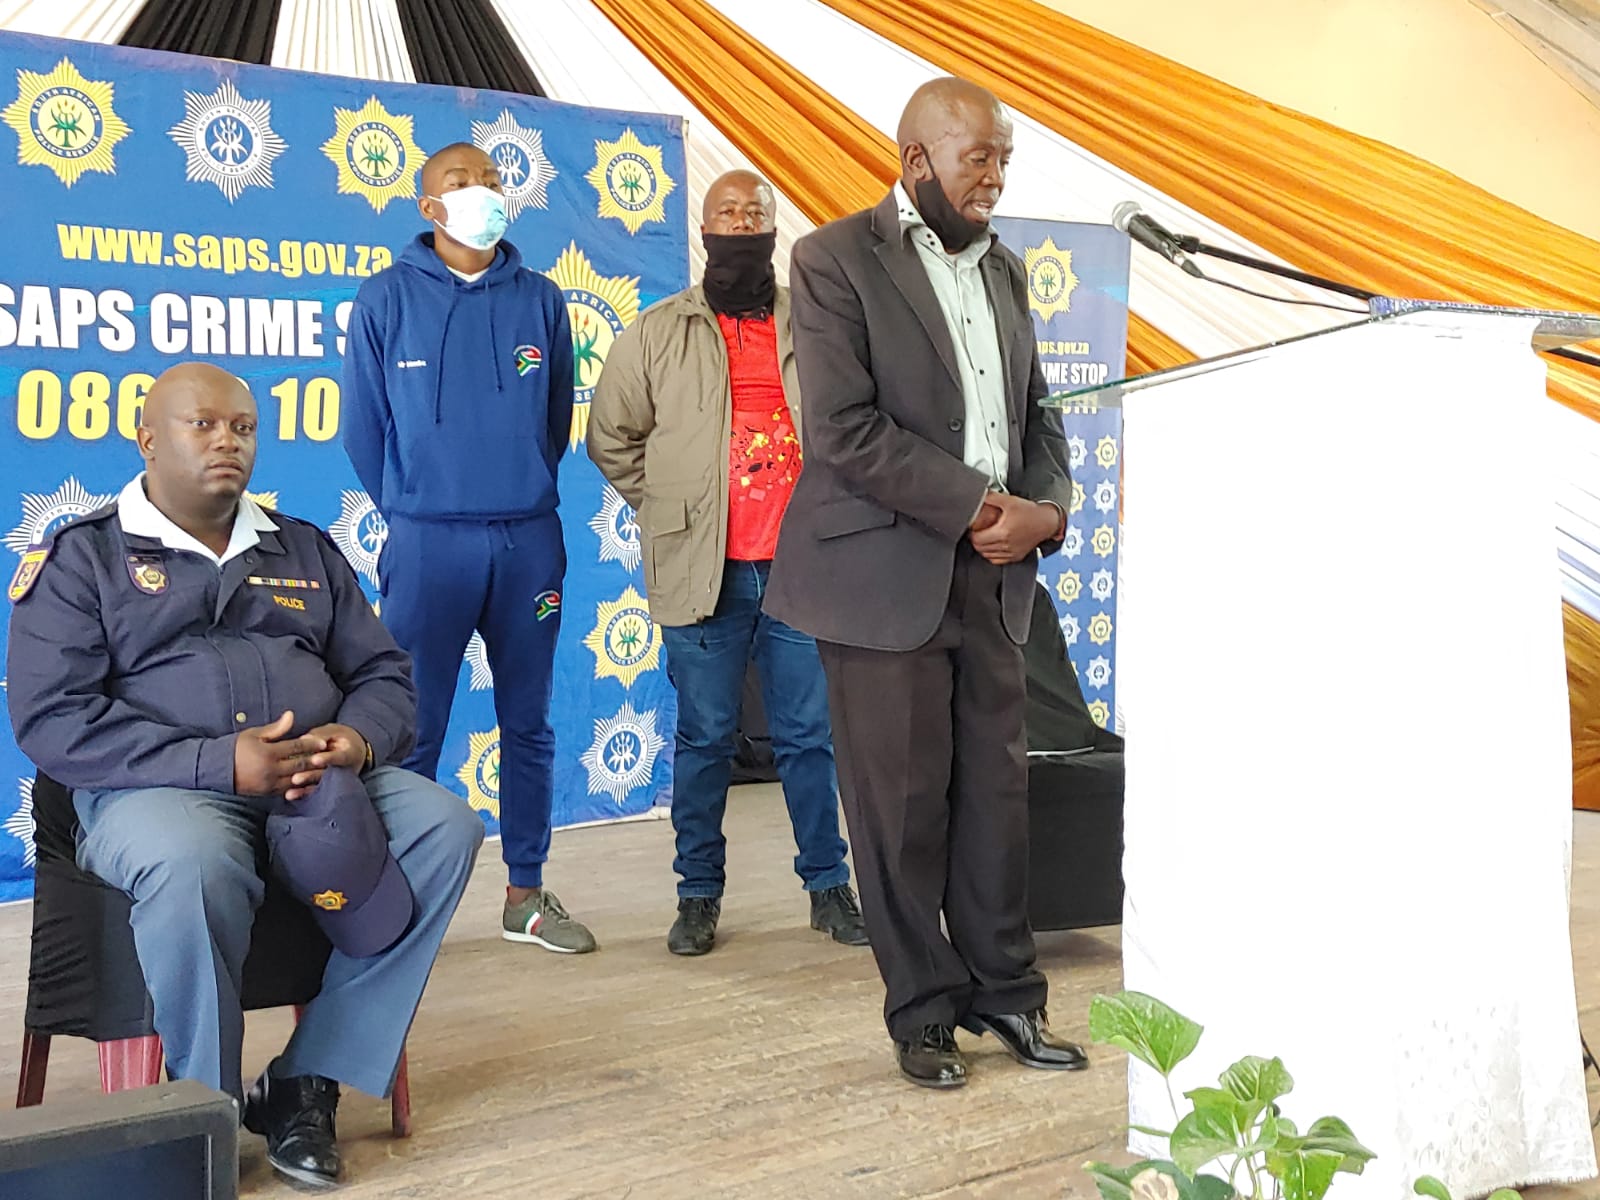 SAPS Commissioner delivers keynote address in a memorial service of the late Sergeant Nyameko Mbelani - Eastern CapeSAPS Commissioner delivers keynote address in a memorial service of the late Sergeant Nyameko Mbelani - Eastern Cape